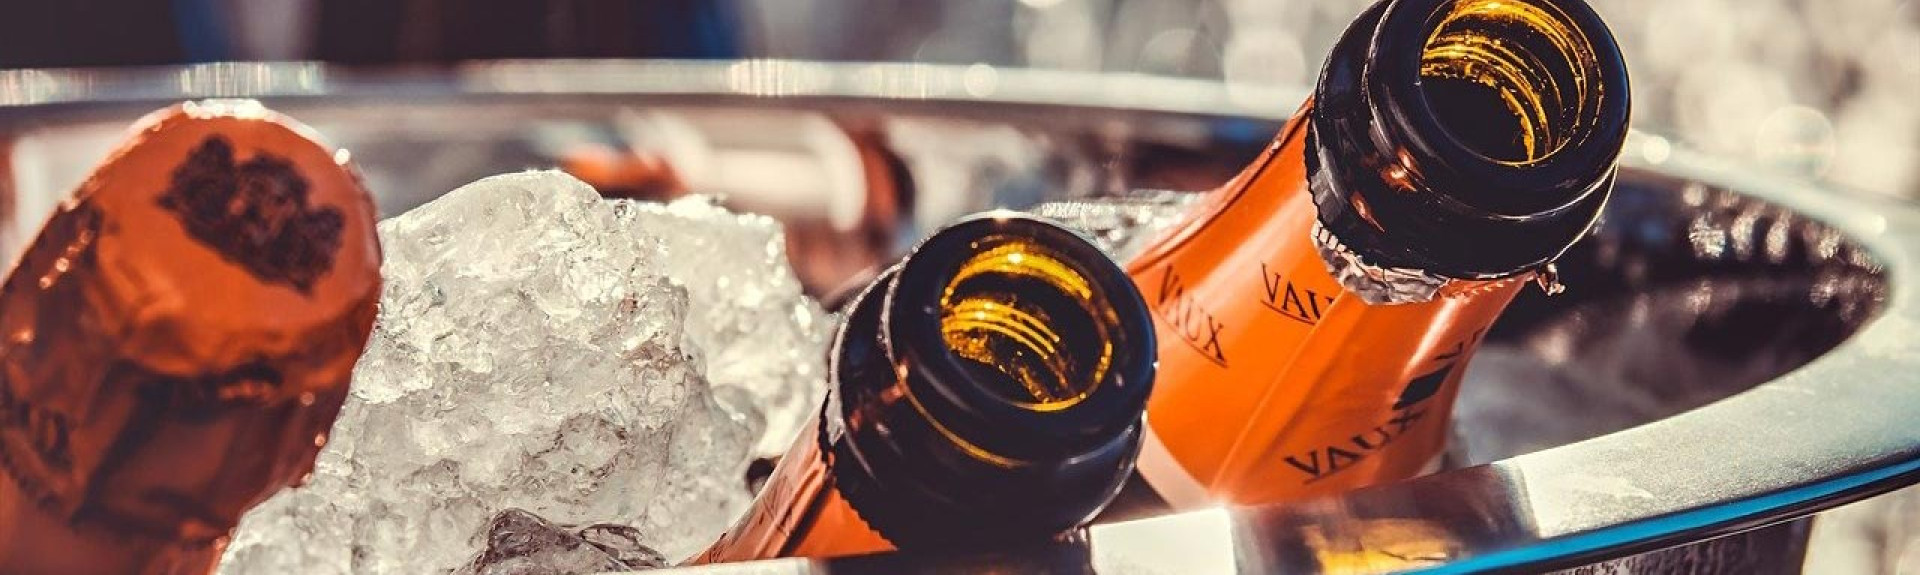 The 10 Best Champagne Brands You Should Try This Year